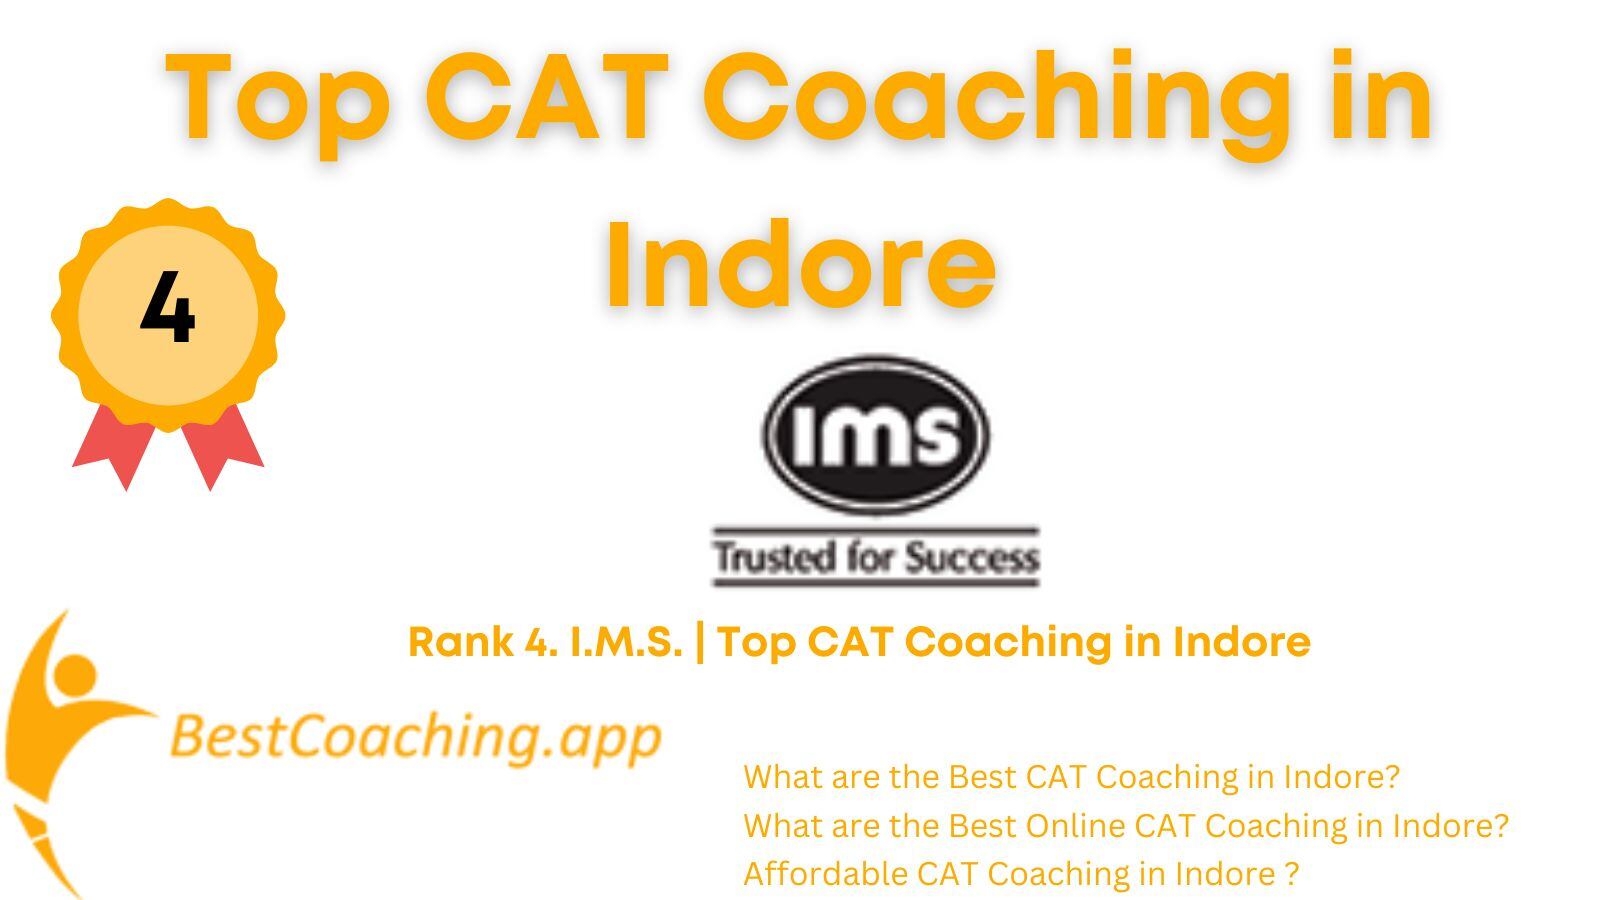 Rank 4. I.M.S. | Top CAT Coaching in Indore